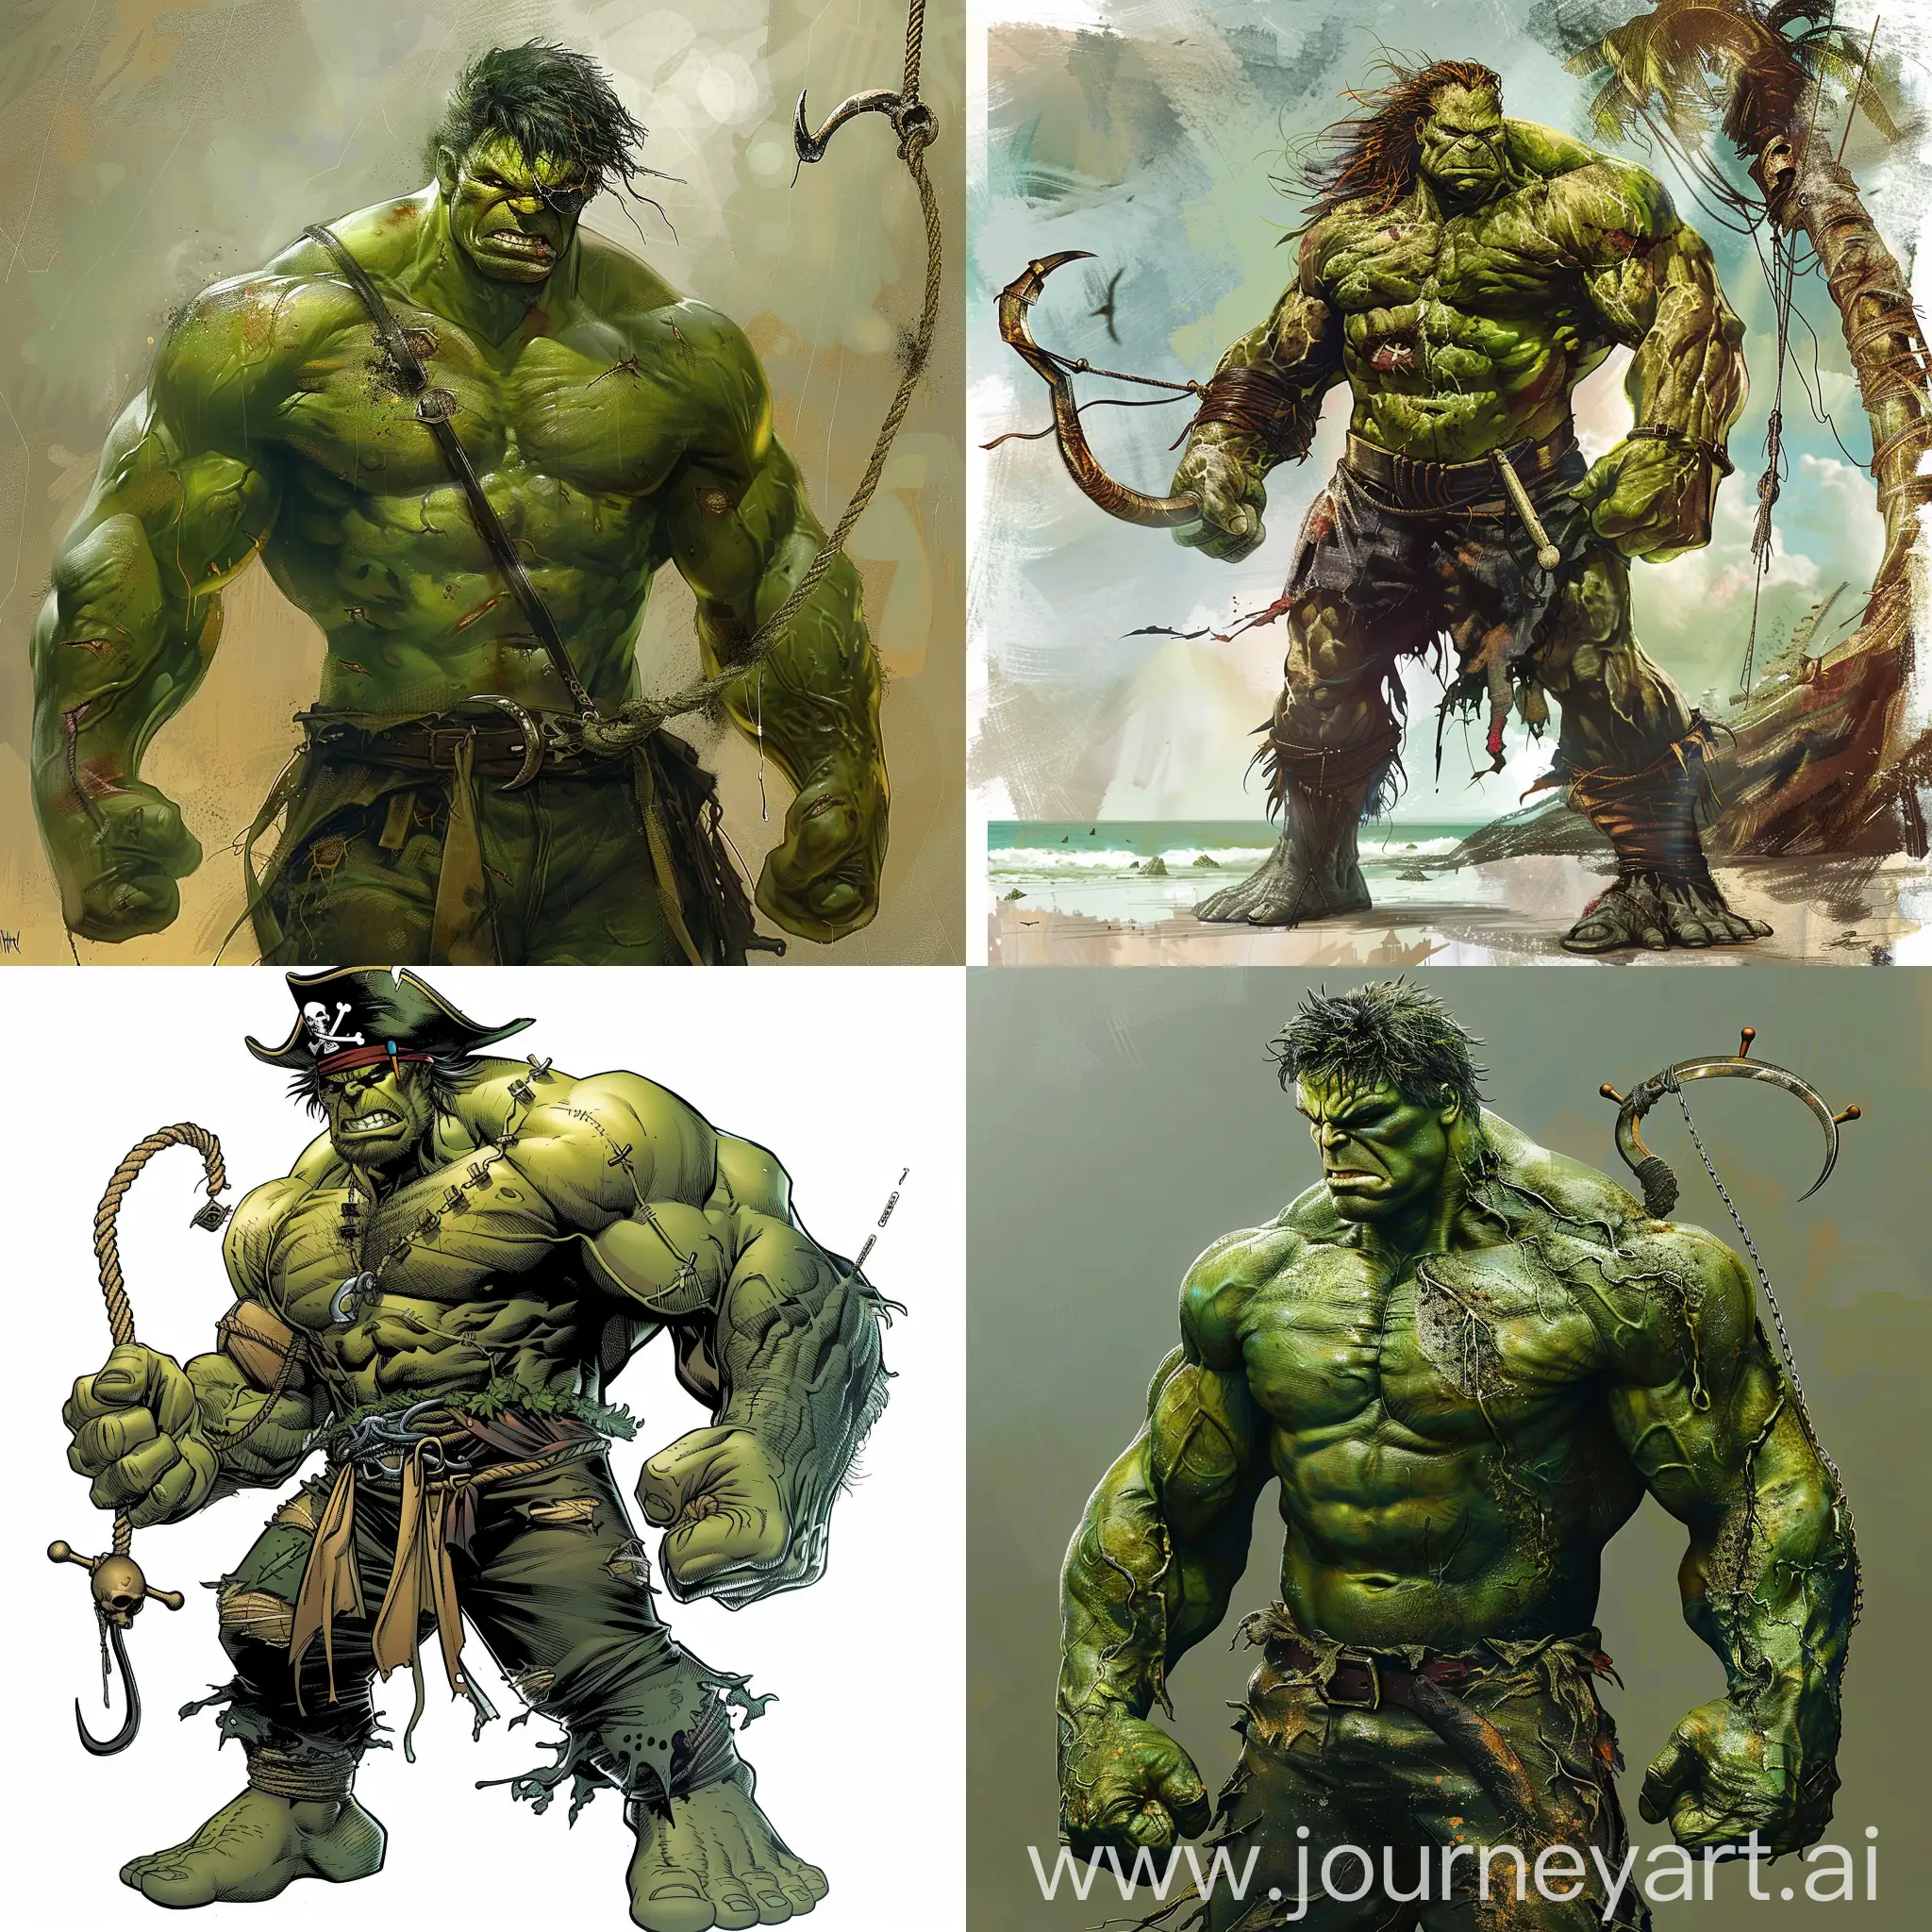 Hulk-Pirate-with-Hook-Hand-in-Full-Growth-Portrait